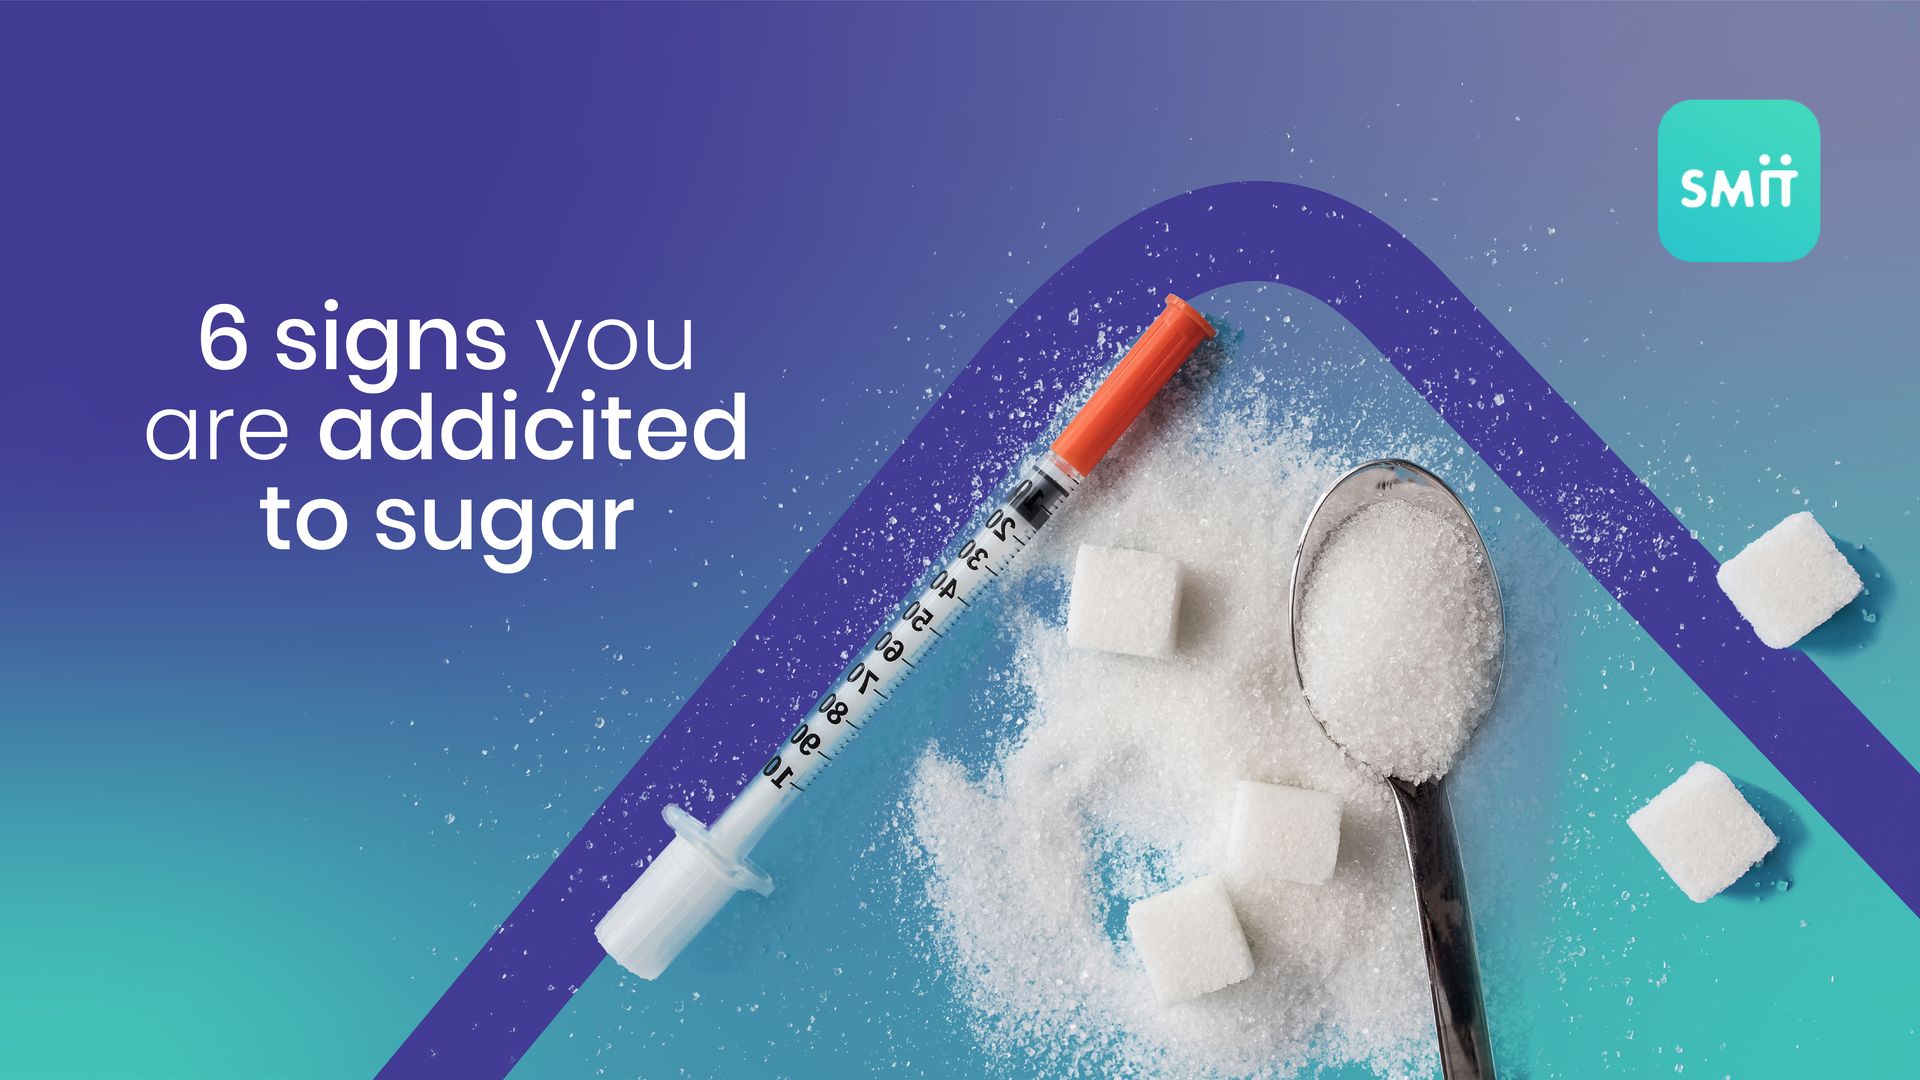 6 signs you are addicted to sugar